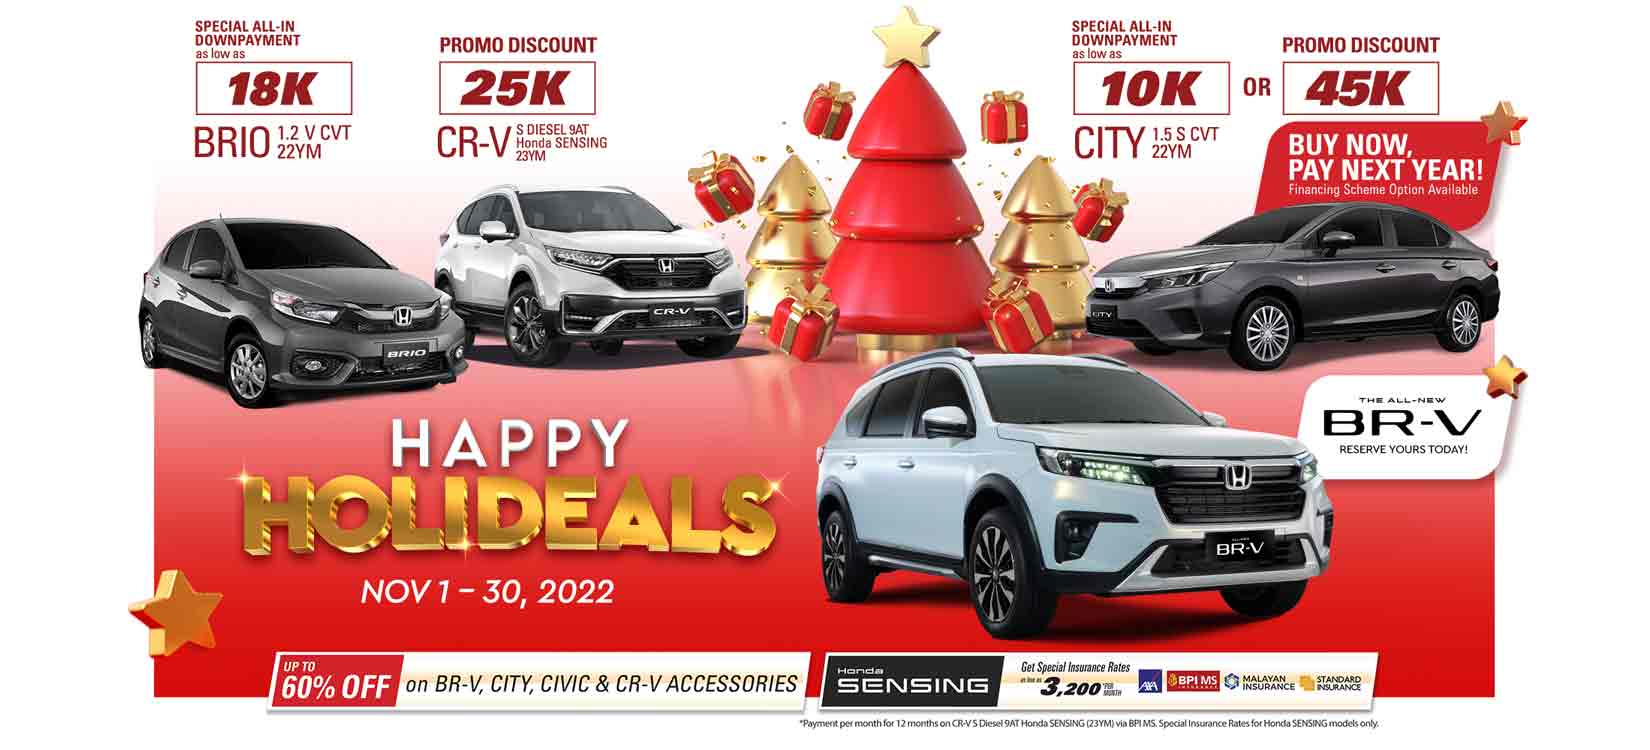 Grab Honda’s holiday offerings with “Happy Holideals” promo